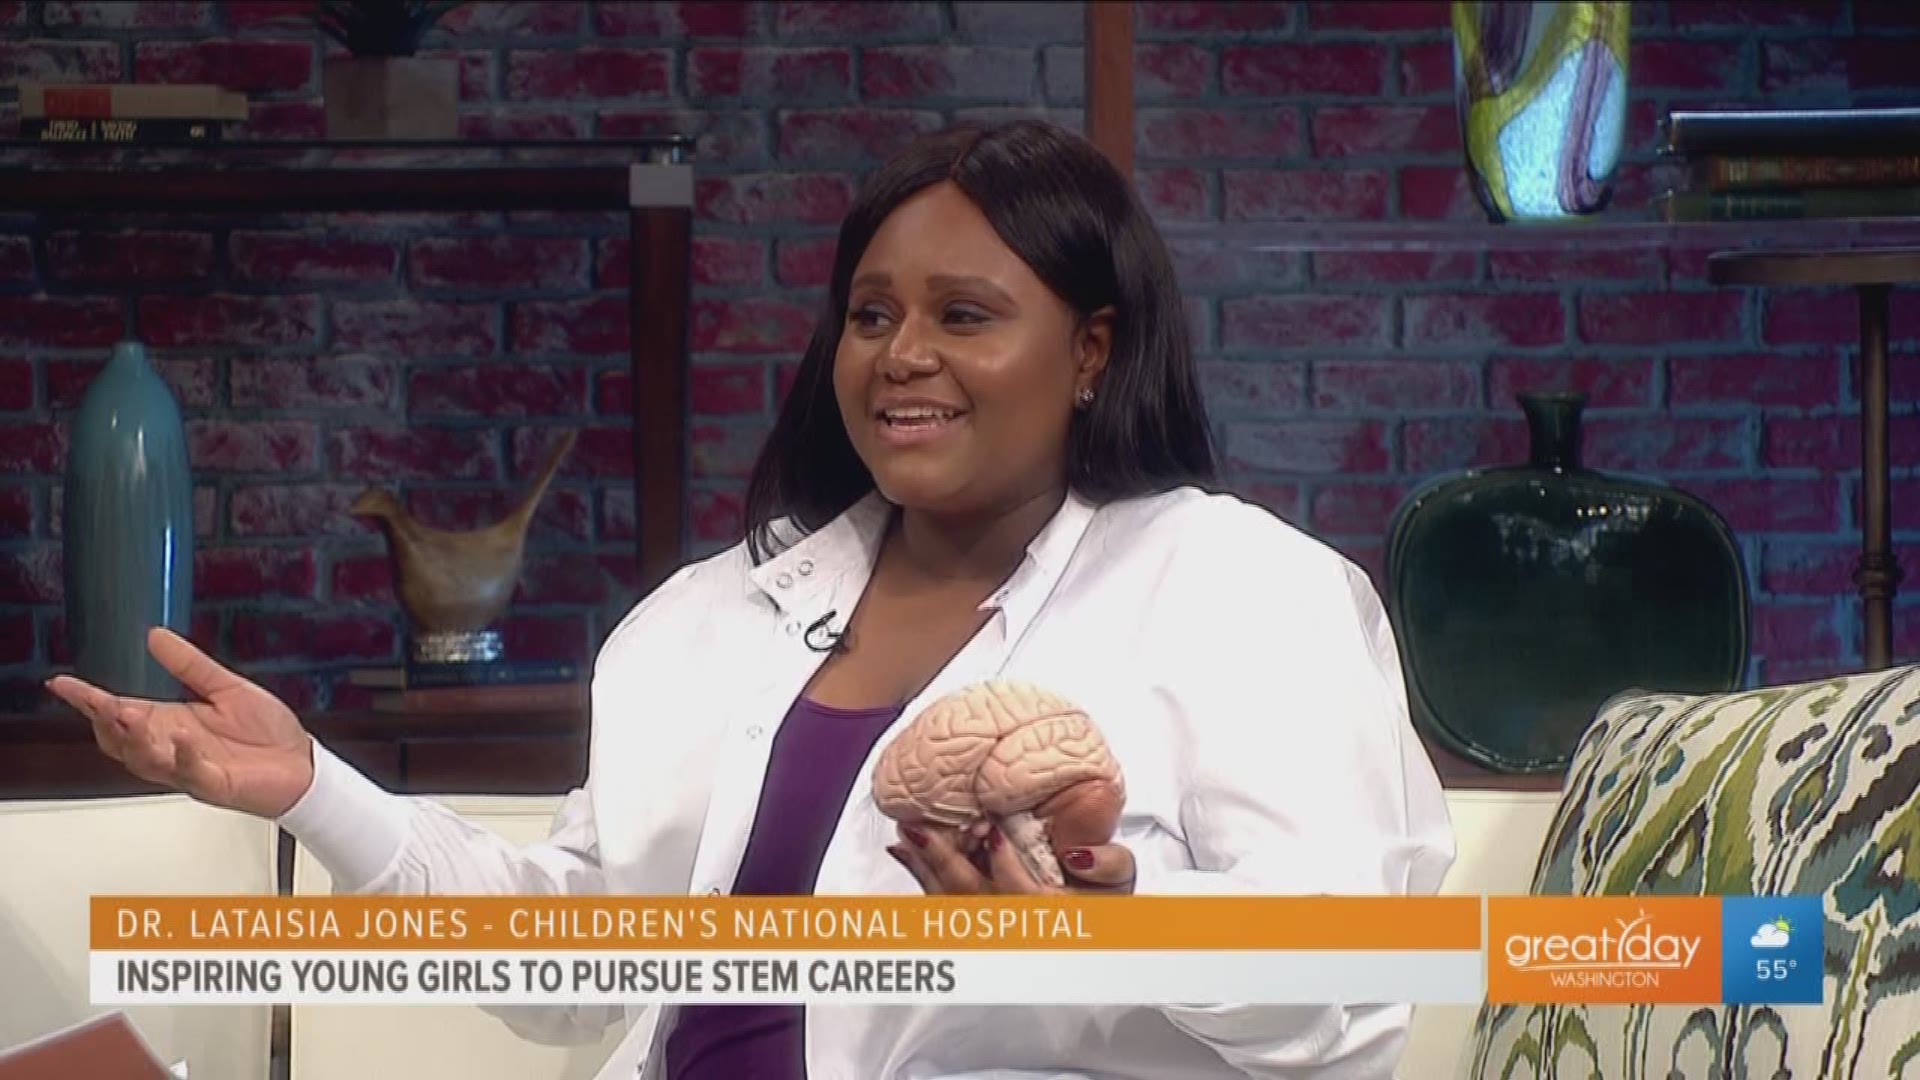 Dr. Lataisia Jones of Children's Hospital explains how to attract young women to careers involving STEM education. She is featured on CBS' Mission Unstoppable.